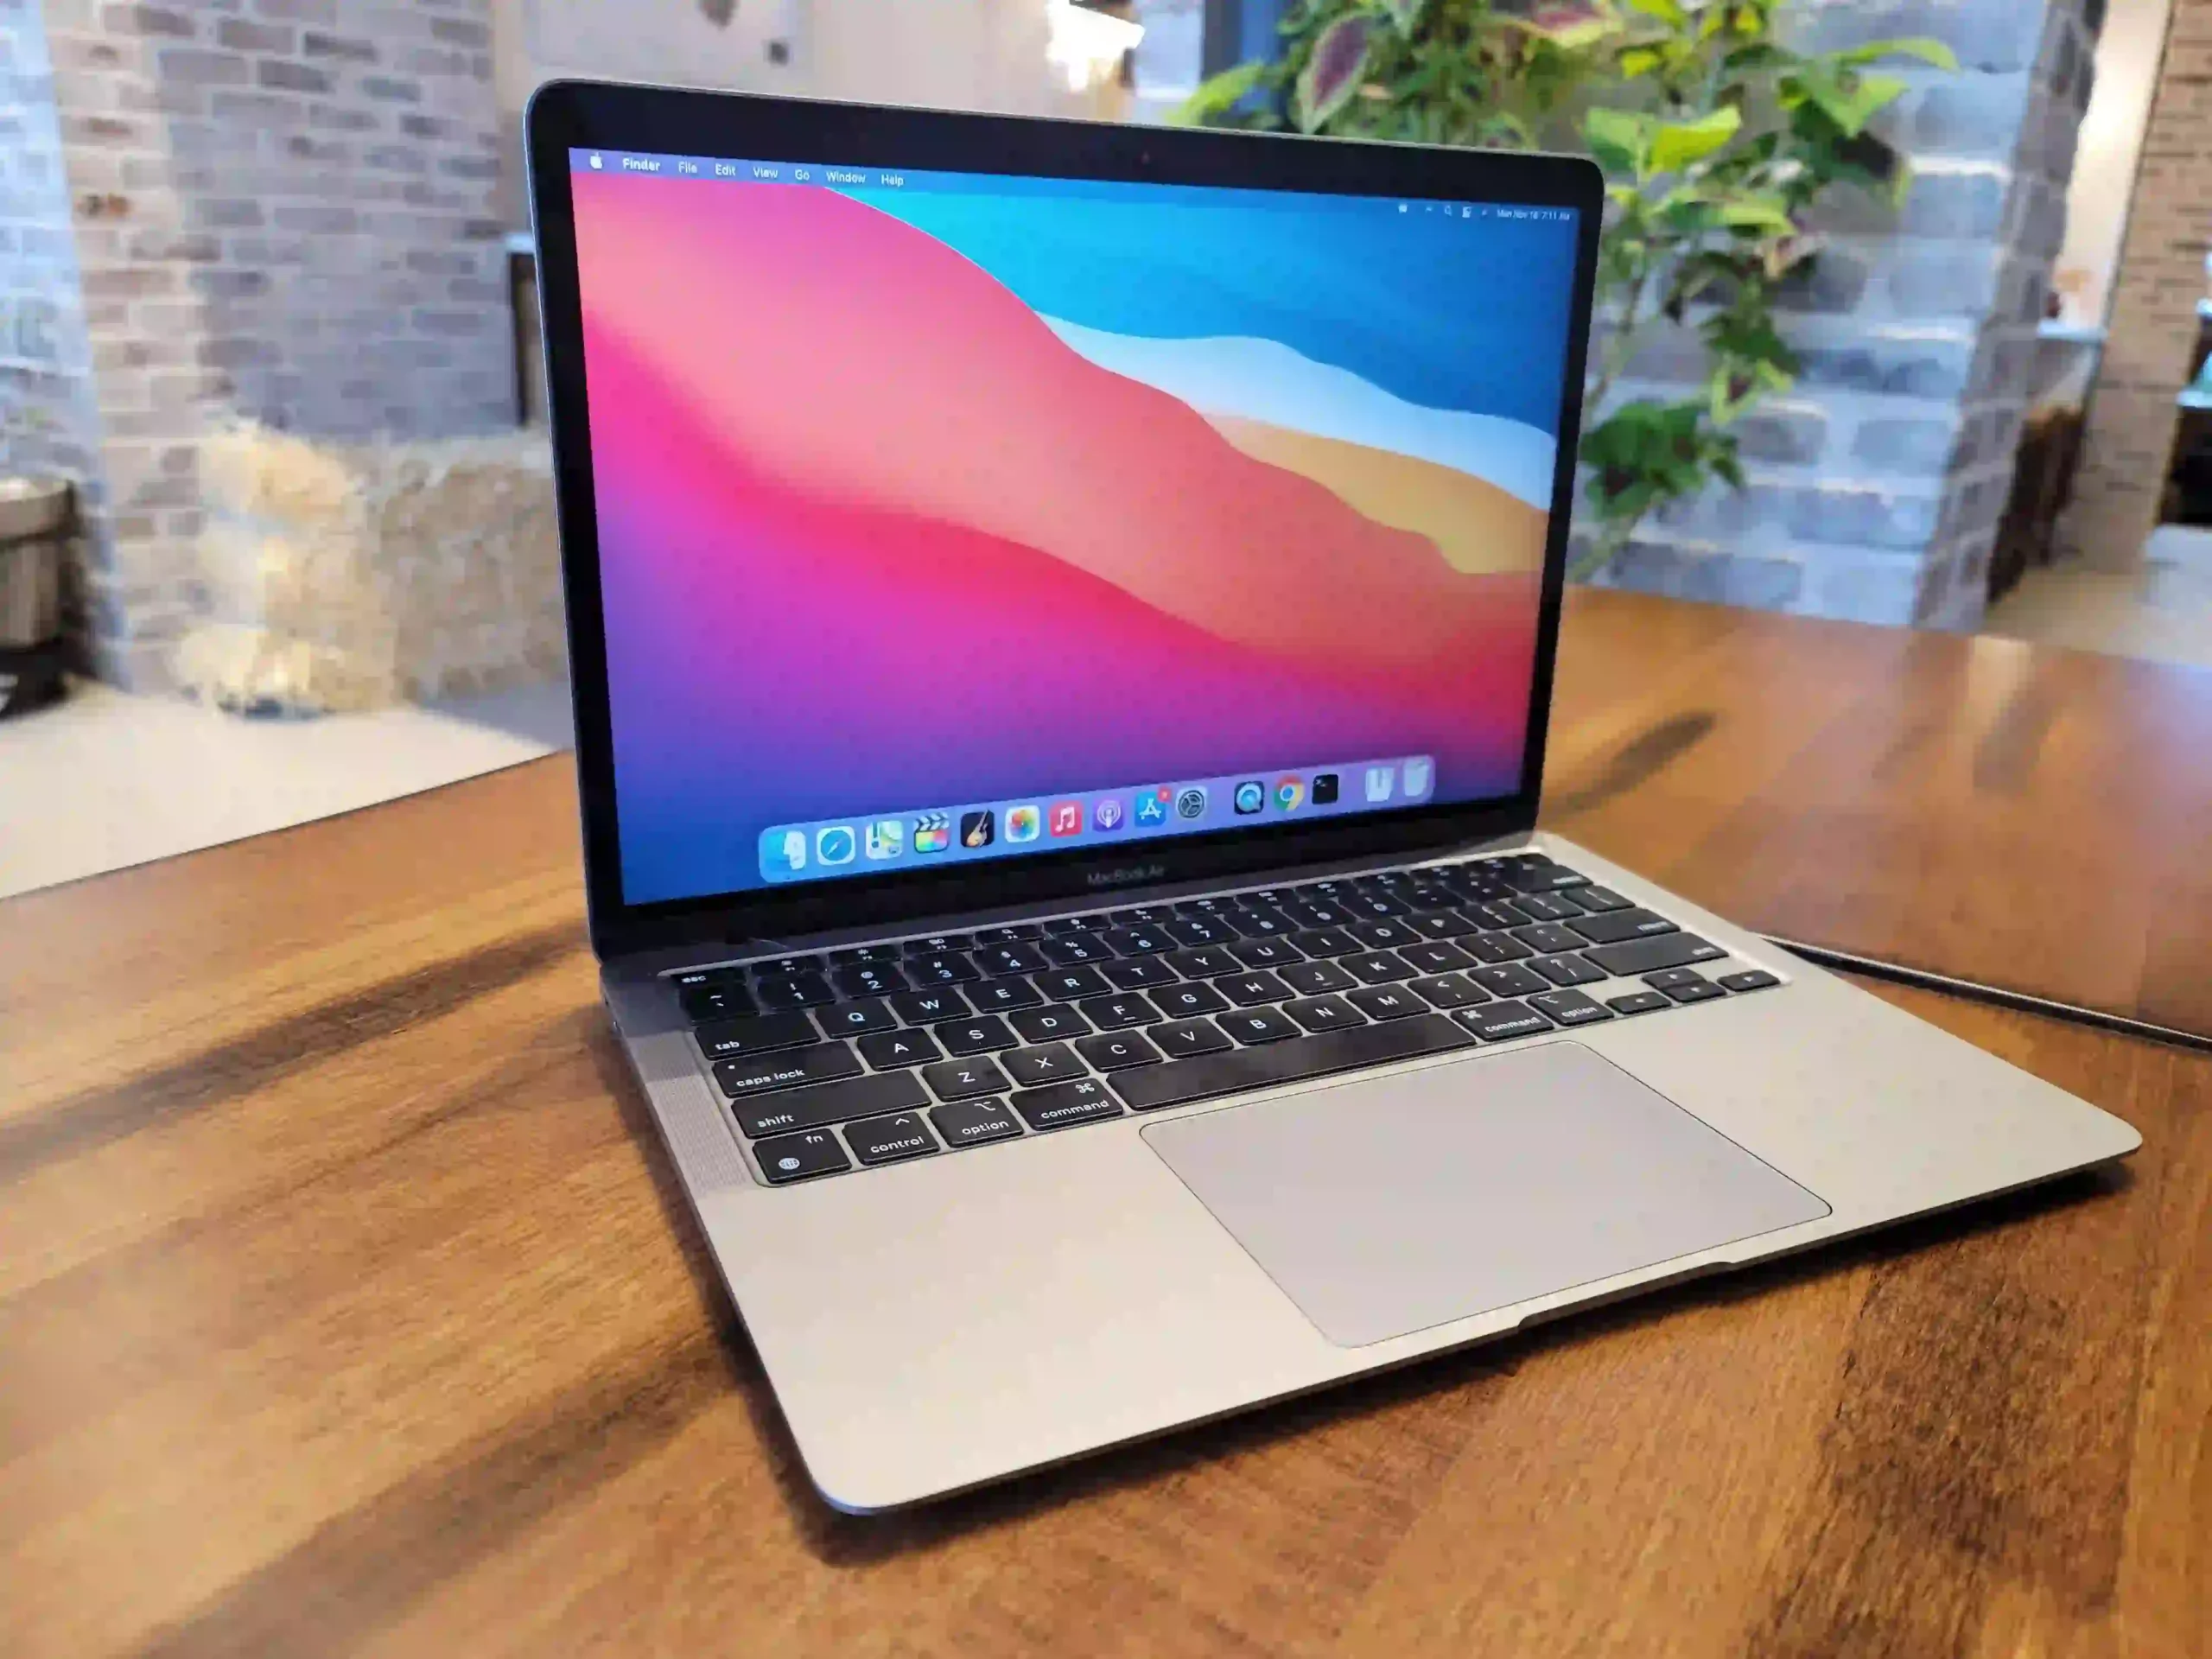 MacBook Air, MacBook Pro, and iMac Available at Discounted Prices During Christmas Sale: Check Prices